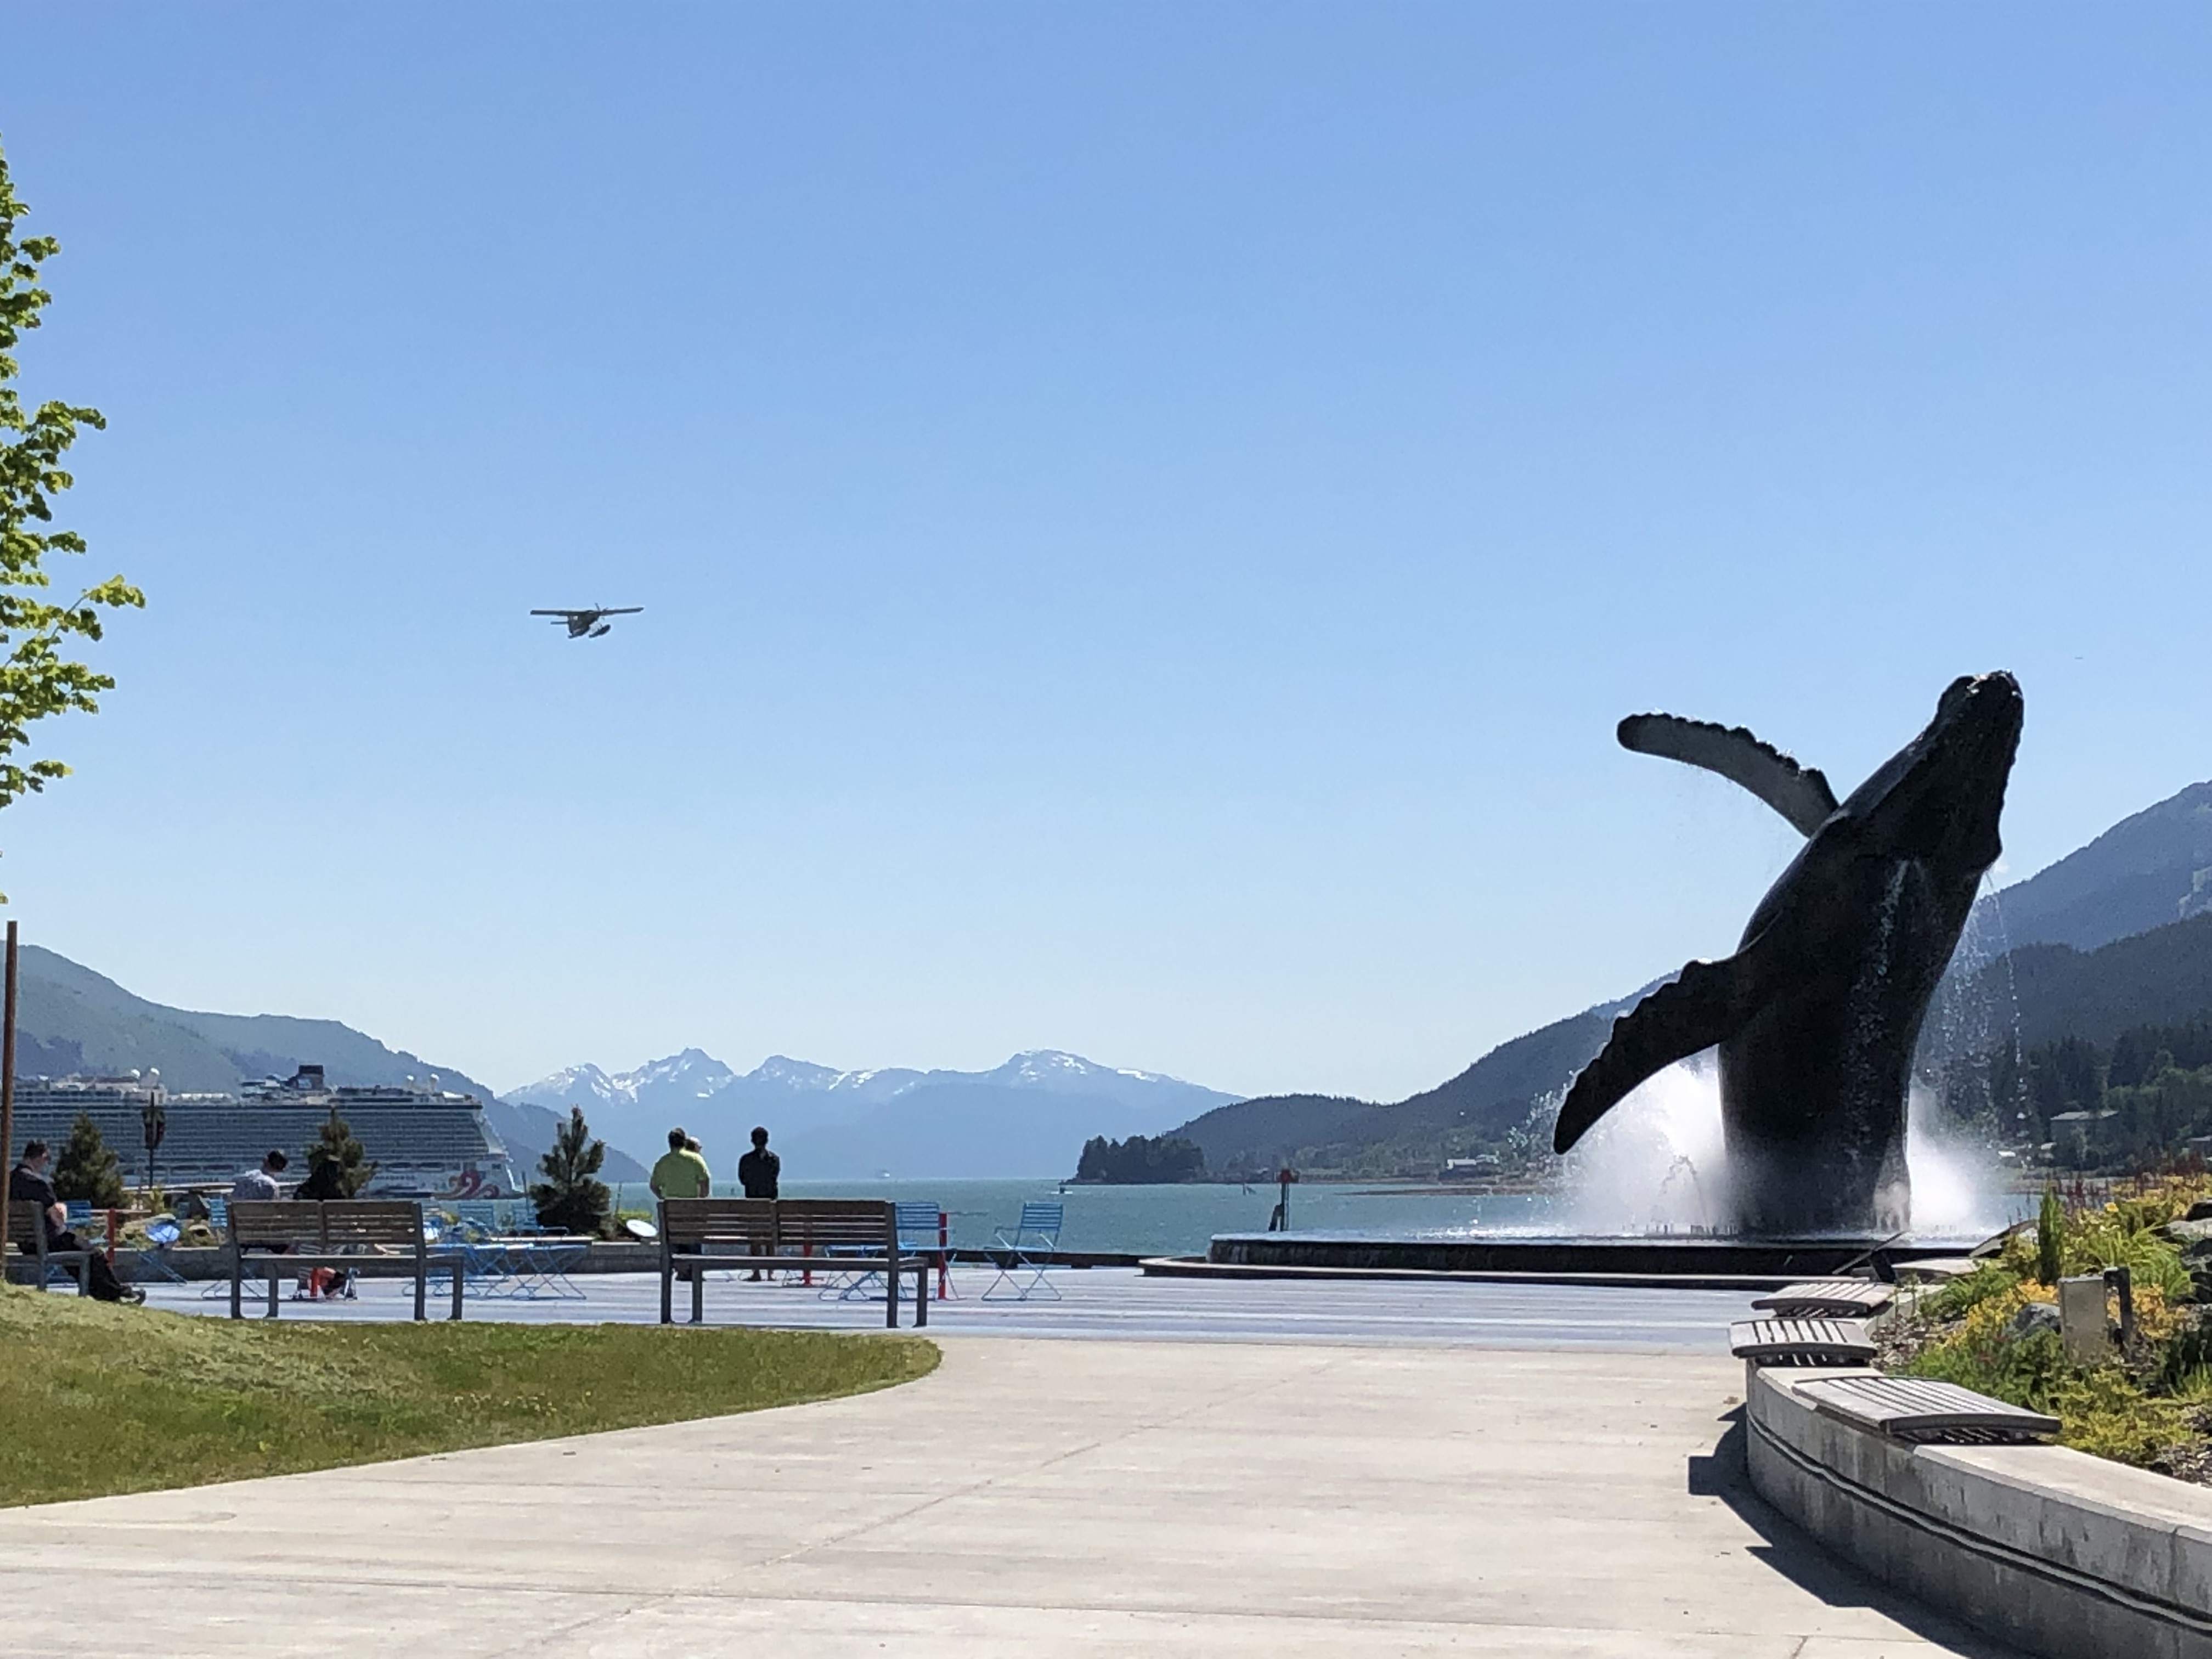 A sunny day at Overstreet Park with the whale statue, people and a float plane on departure.